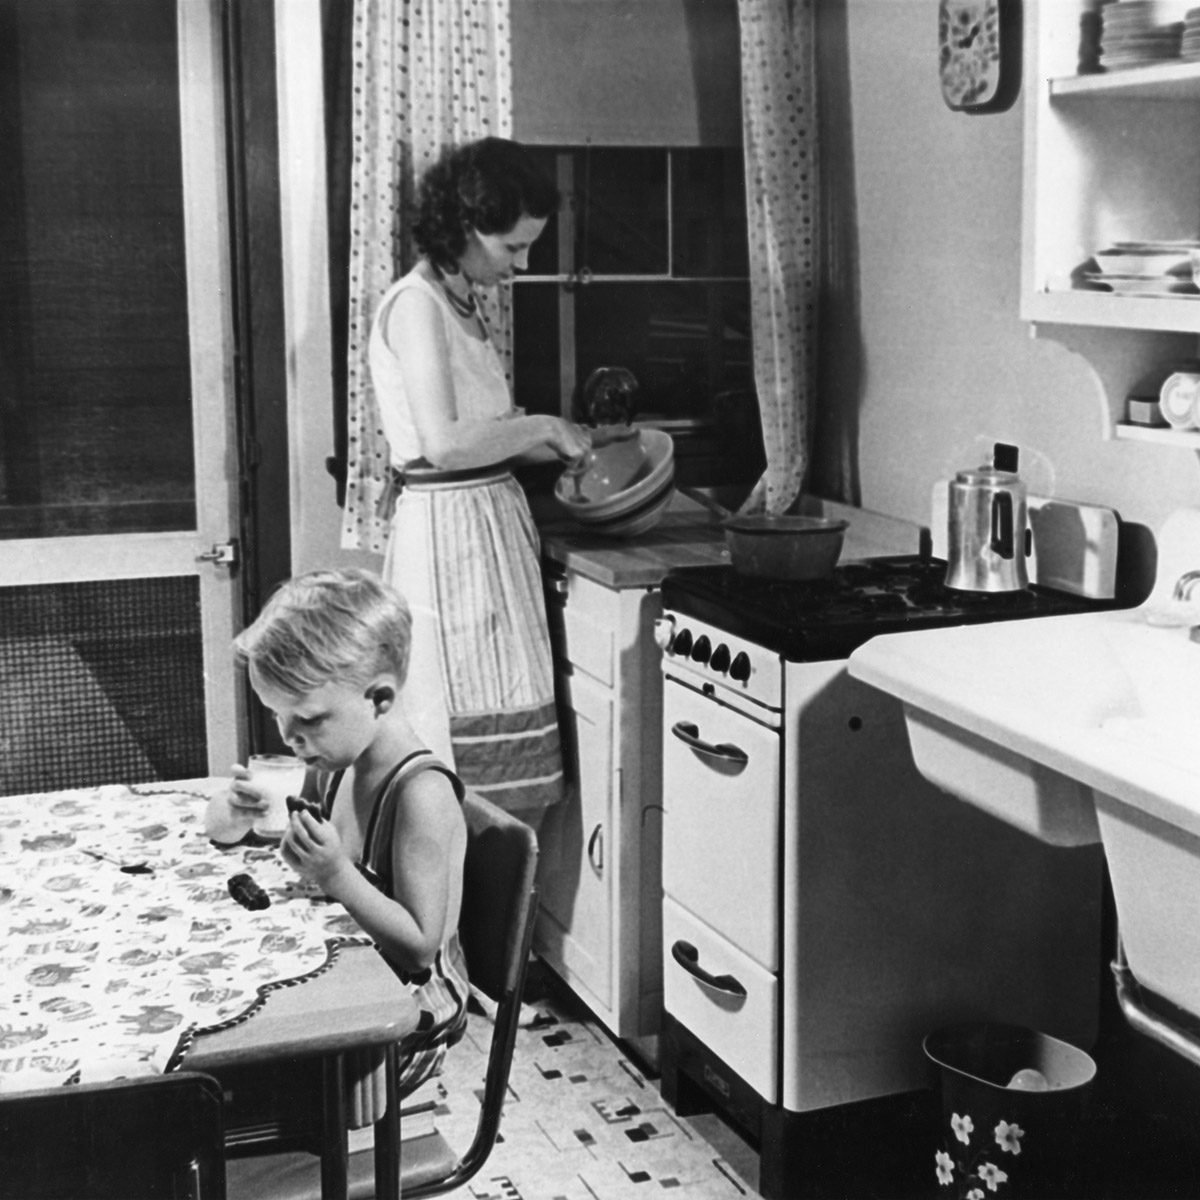 Woman Cooking in Kitchen with Young Boy Eating Cookies with Milk